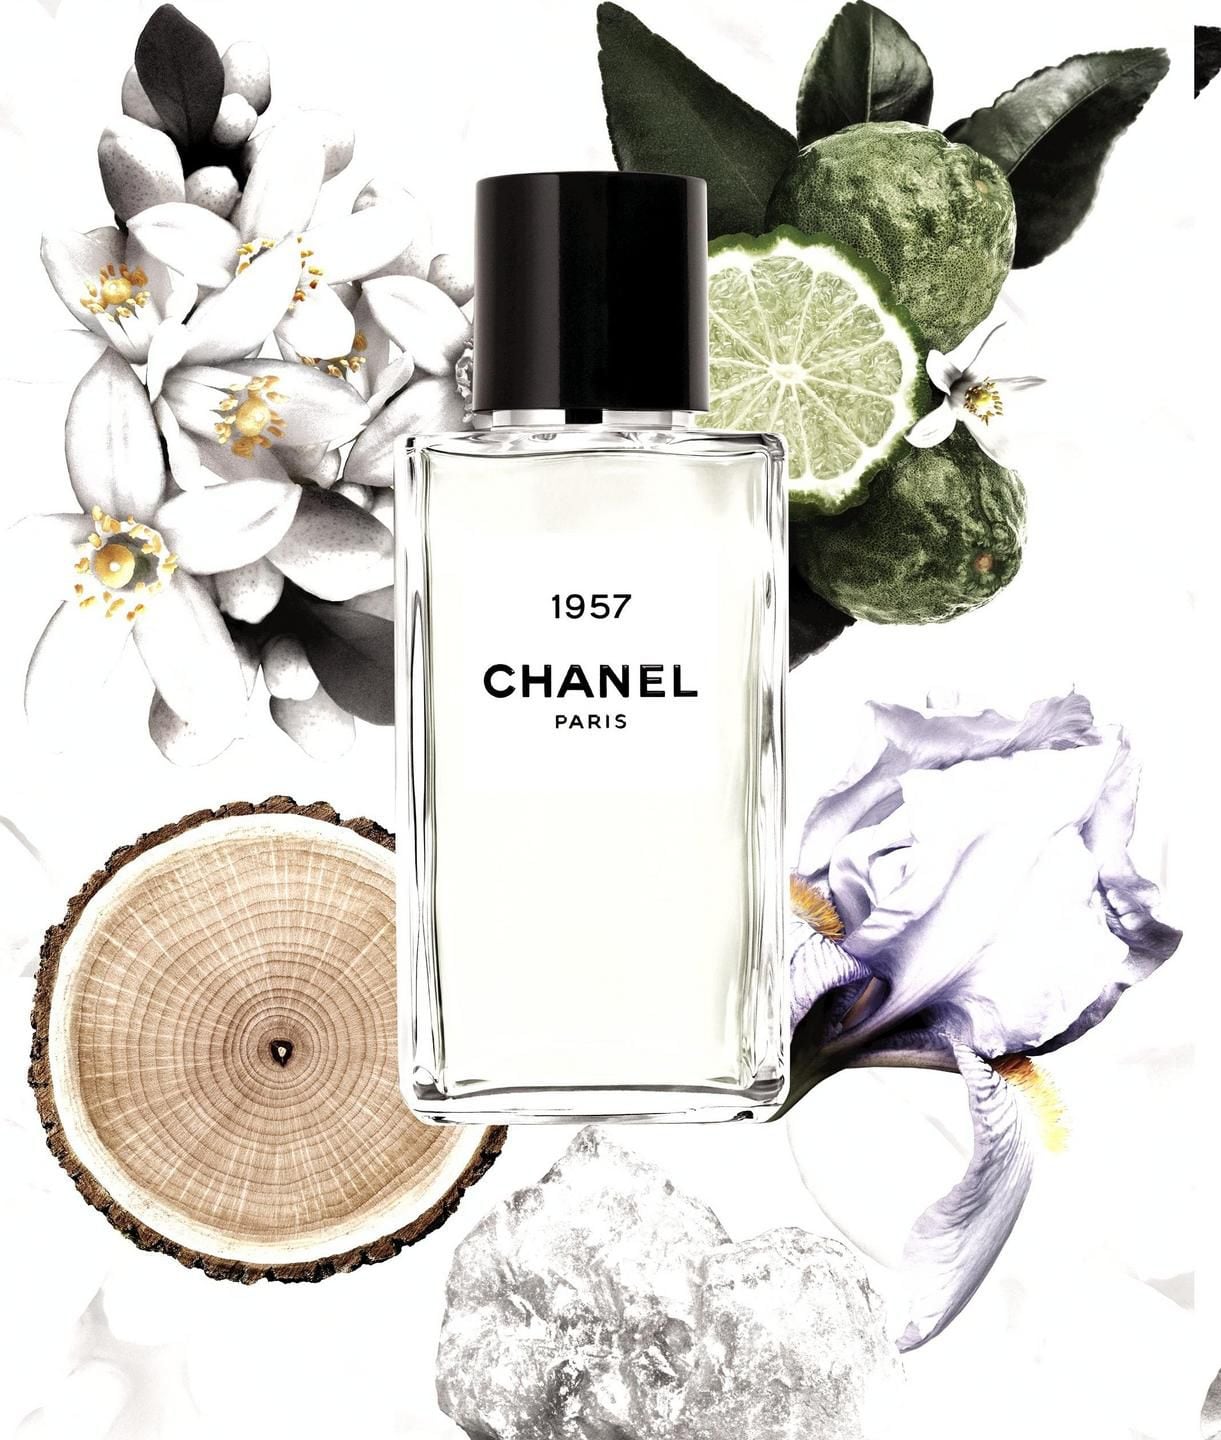 Chanel perfume review! 😍✨, Gallery posted by Odelia Catalina